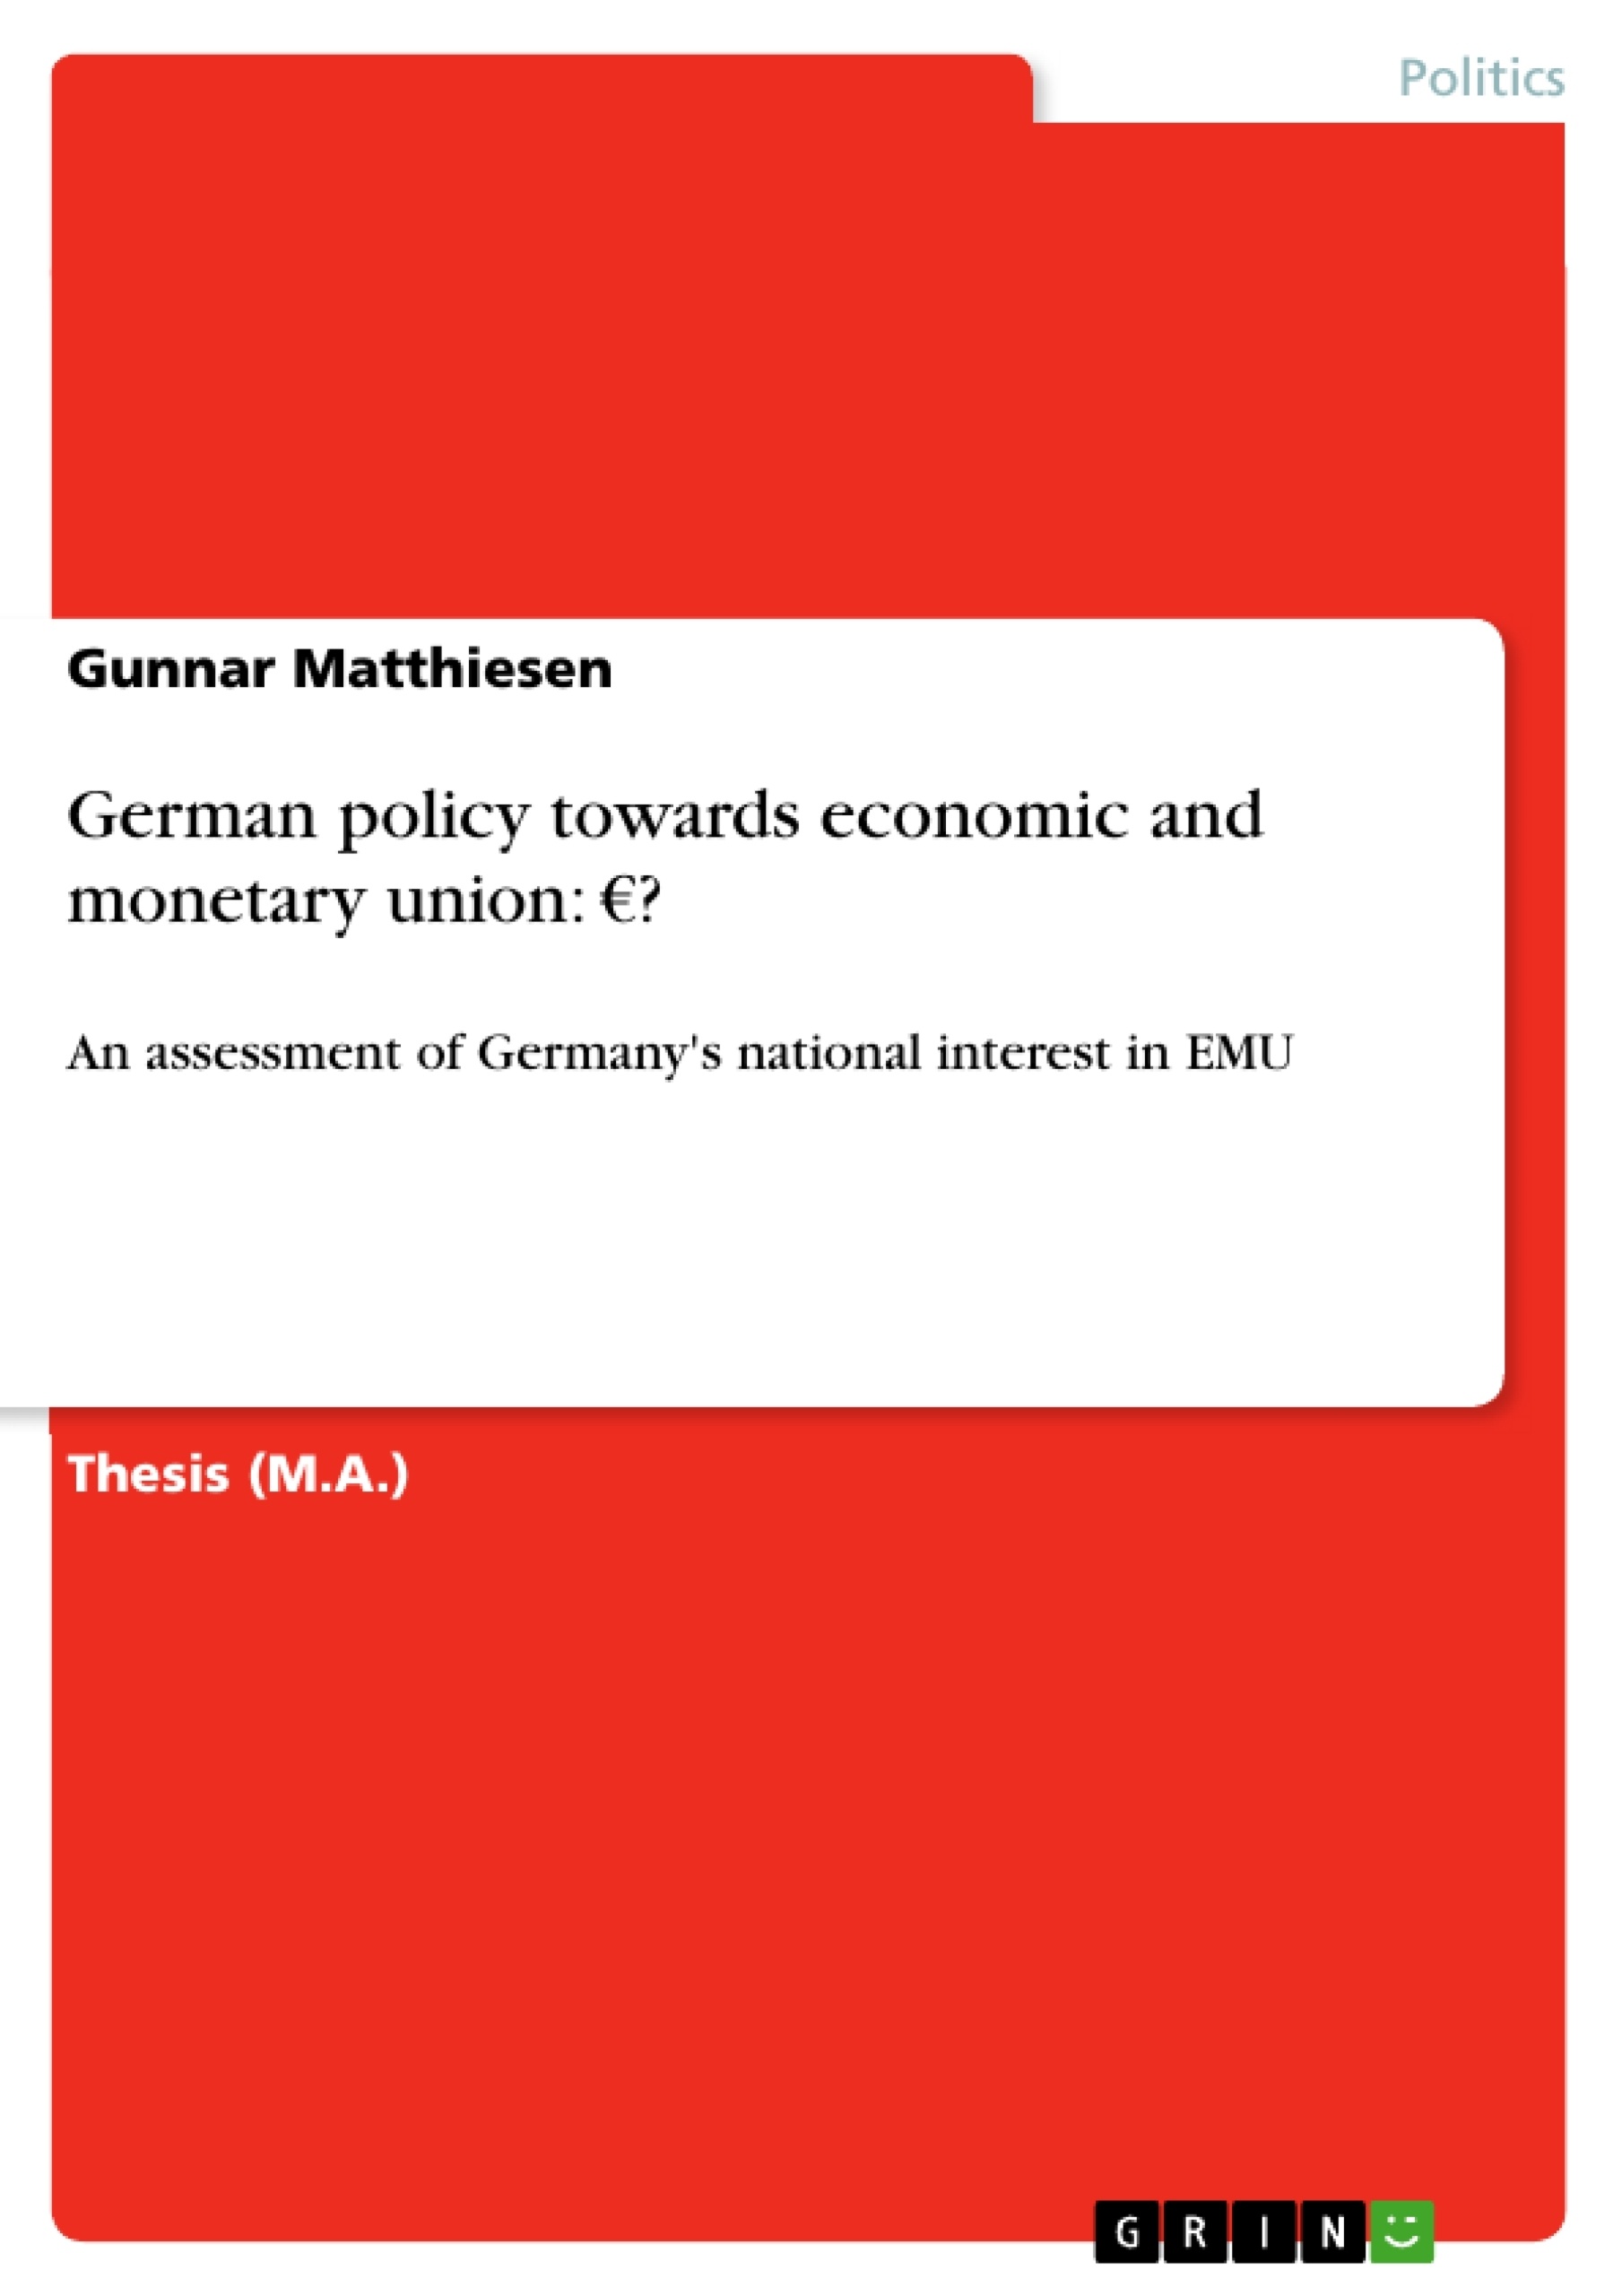 Title: German policy towards economic and monetary union: €?